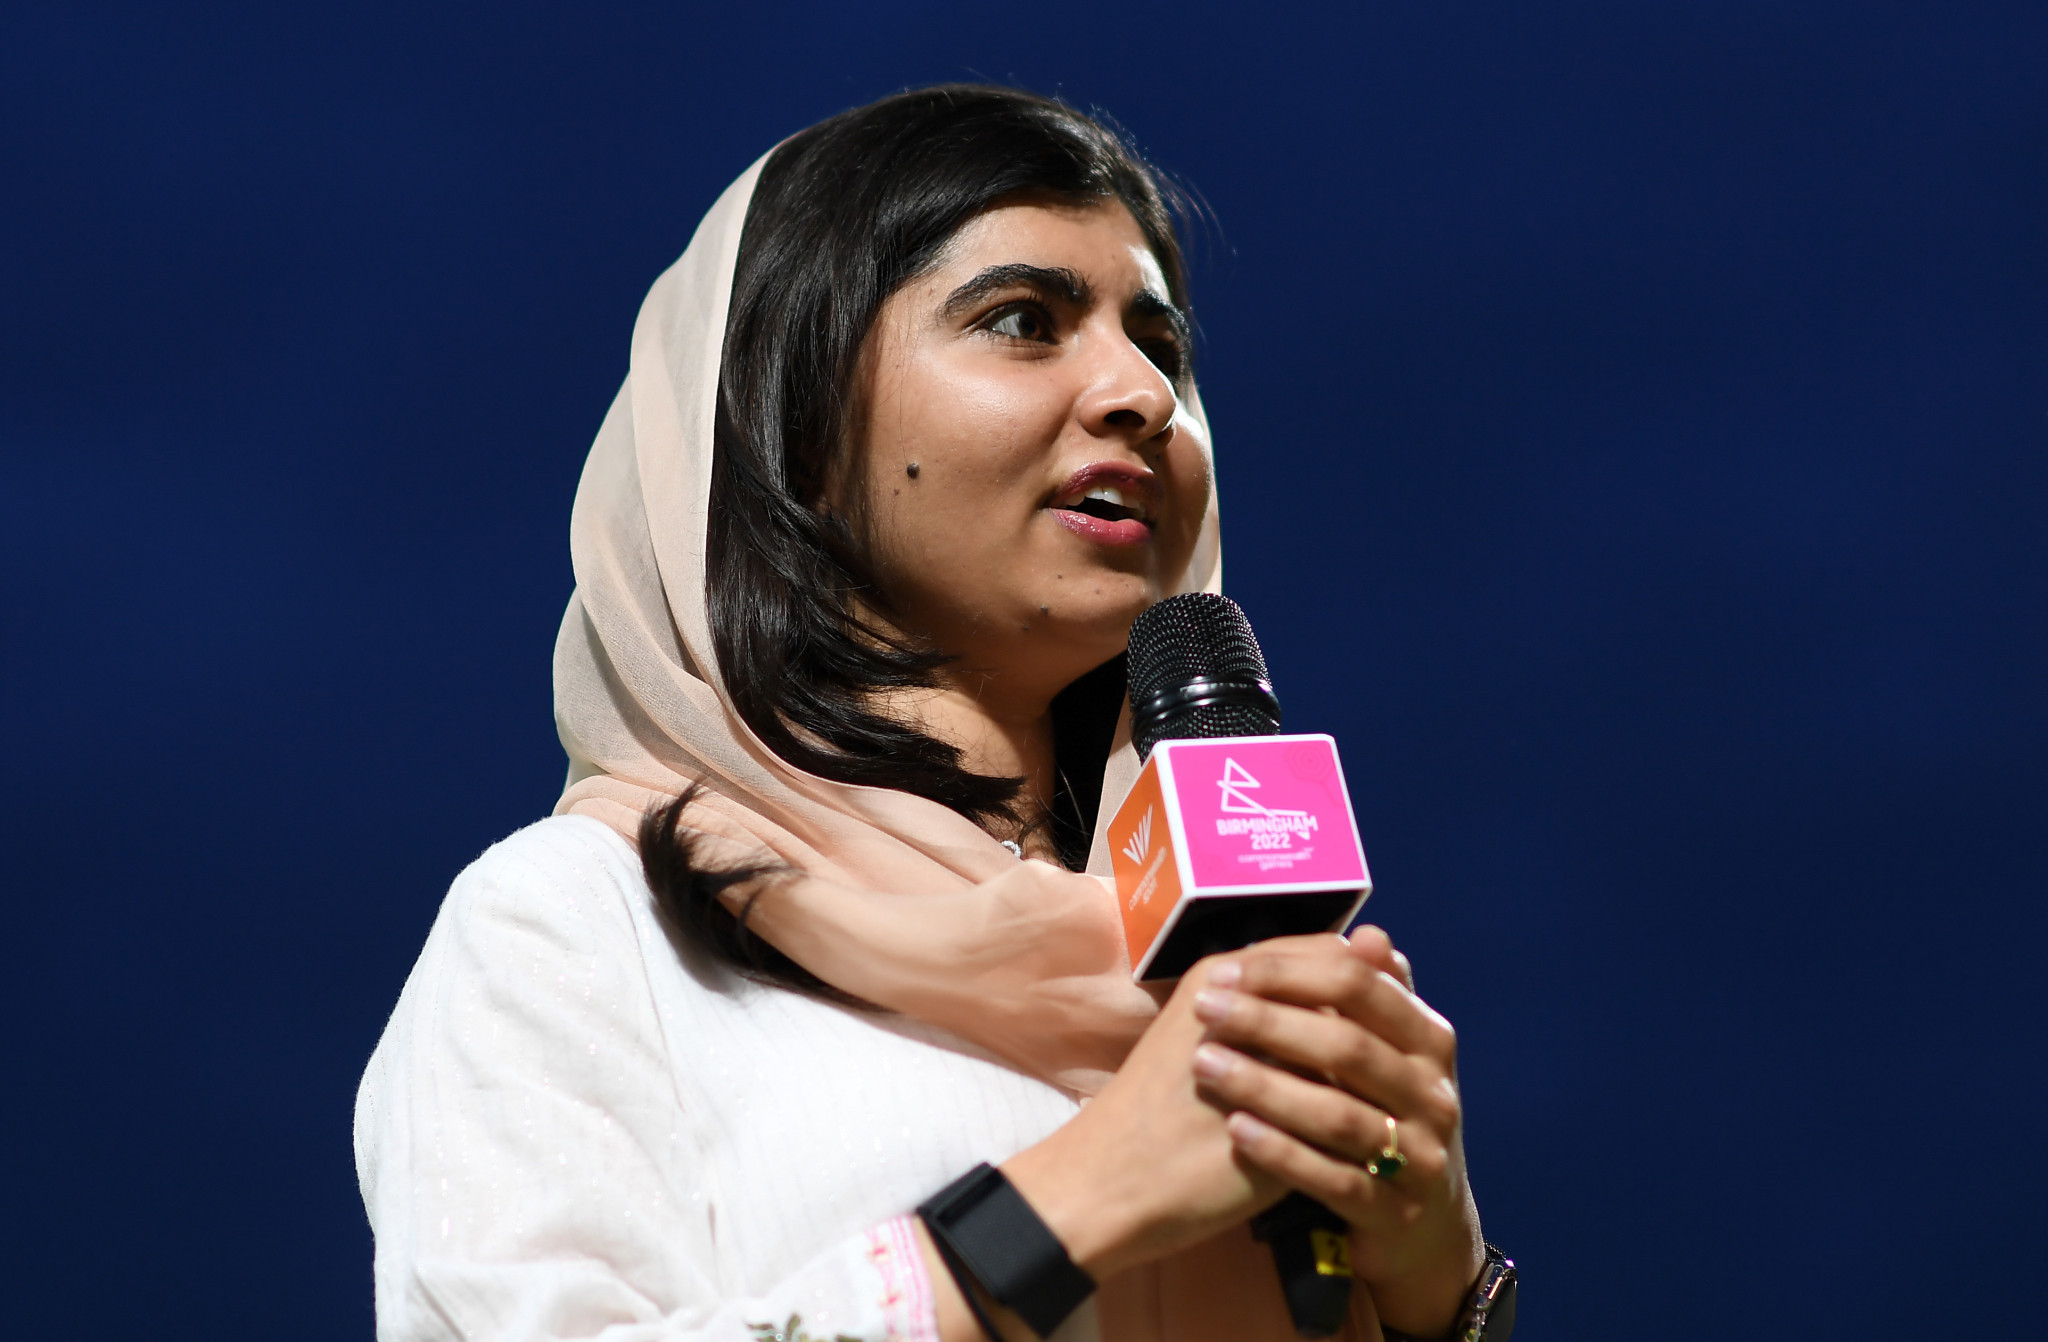 Malala Yousafzai, human rights activist, speaking at Edgbaston during the women's cricket ©Getty Images